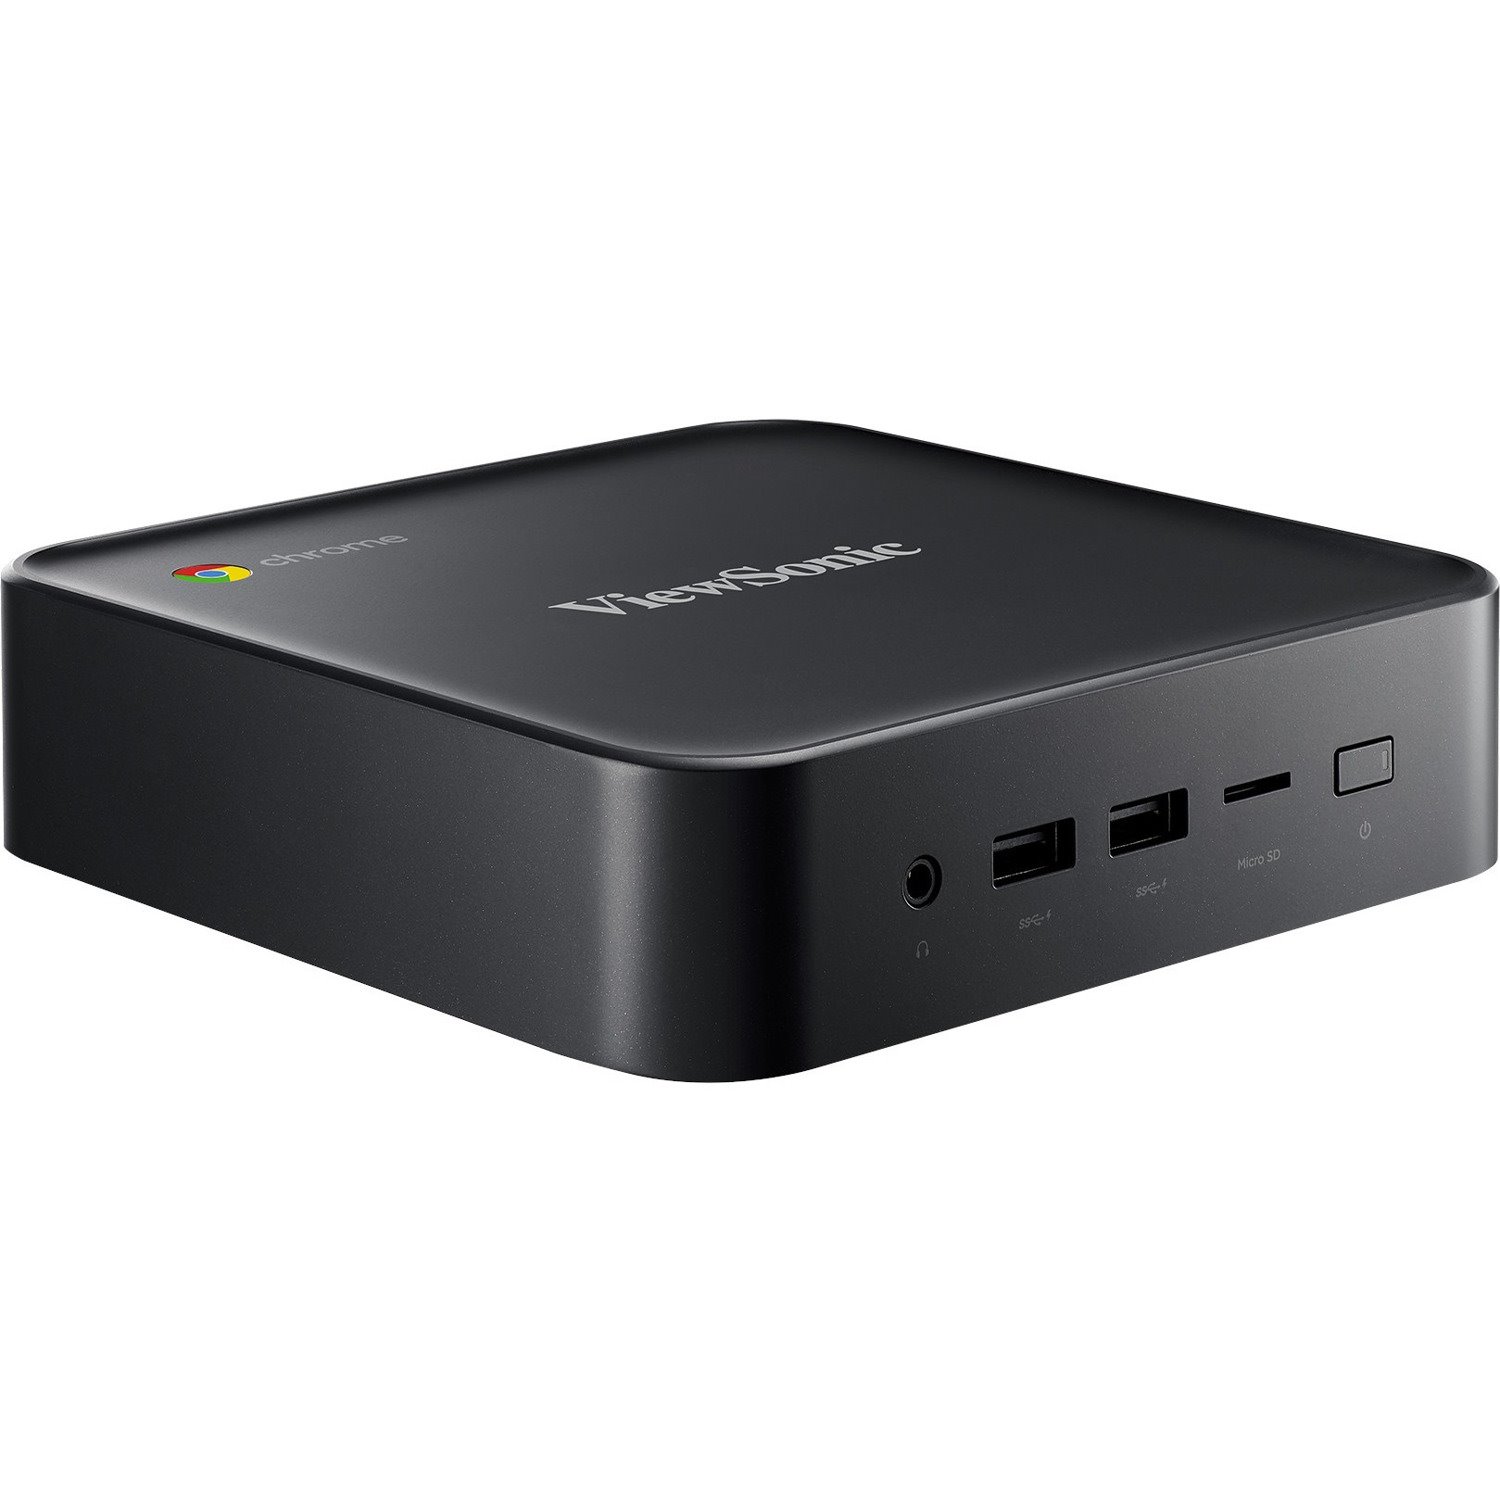 ViewSonic NMP760 Chromebox with Built-in Chrome OS, Google Play Store, Integrated Google Management Console for Education and Corporate Environments